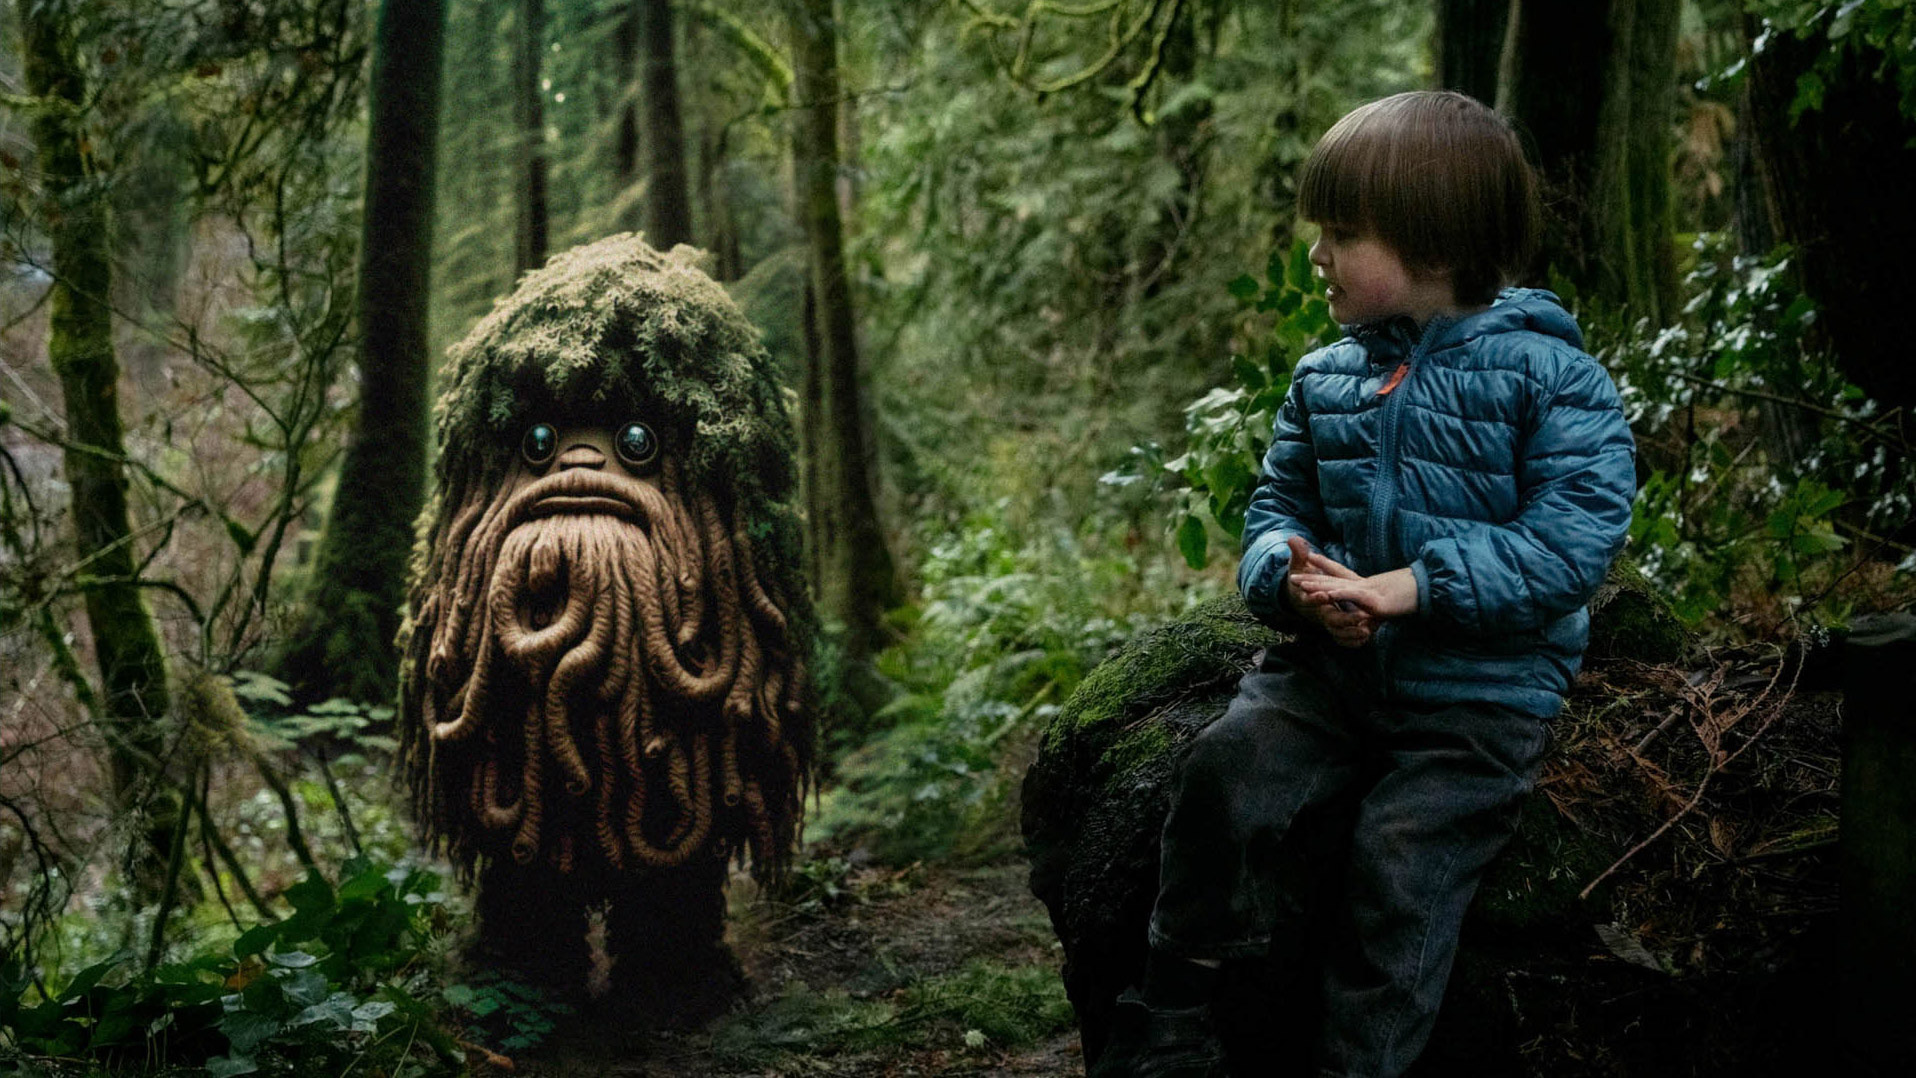 This creative director harnessed AI to create these incredible woodland creatures